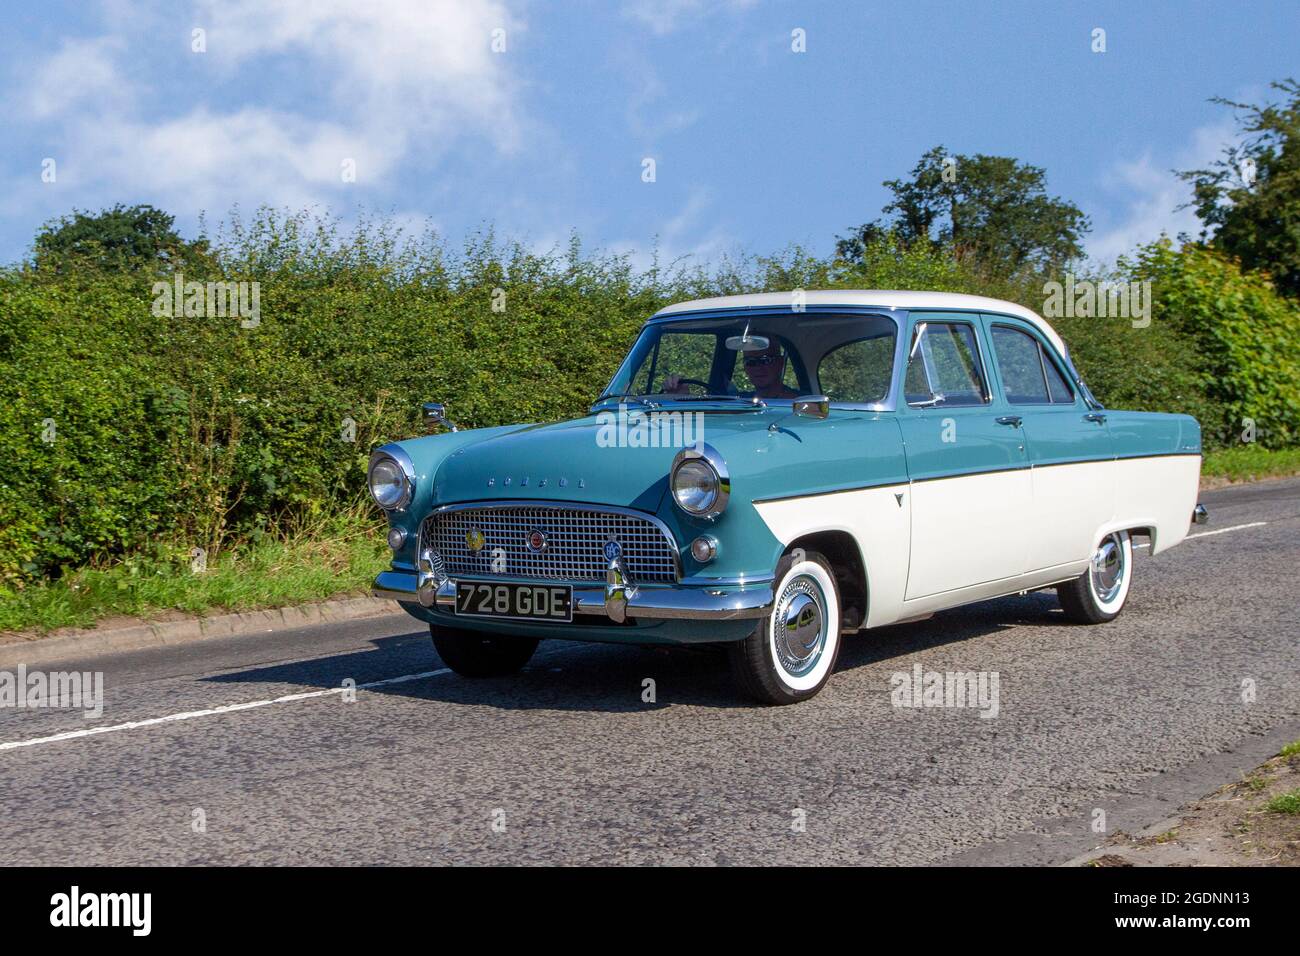 1960 60s sixties Ford Consul blue white 1703cc petrol,  4dr saloon, en-route to Capesthorne Hall classic May car show, Cheshire, UK Stock Photo